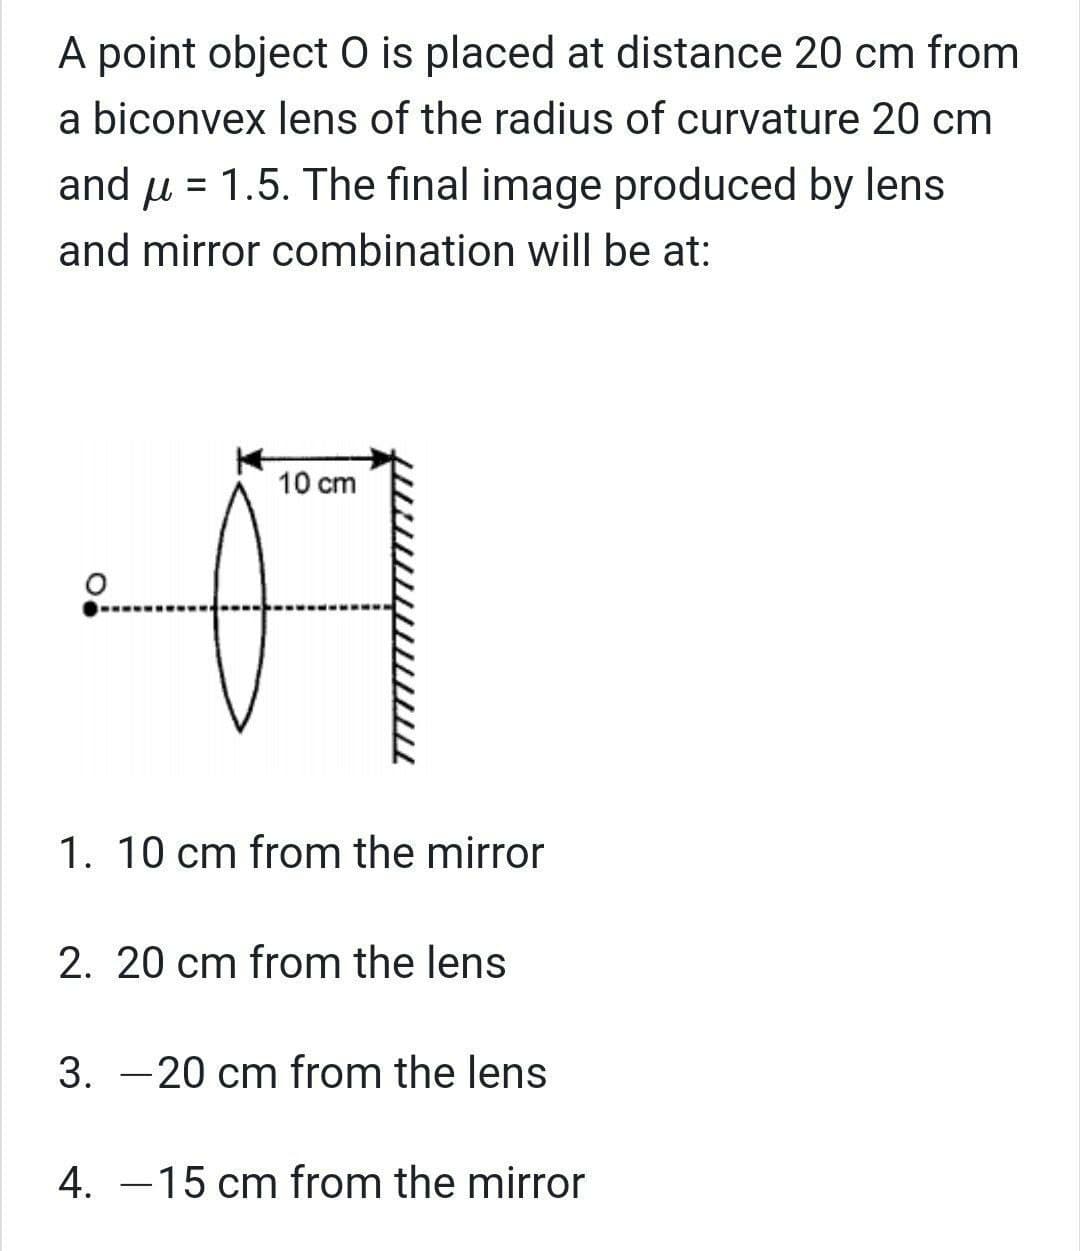 A point object O is placed at distance 20 cm from
a biconvex lens of the radius of curvature 20 cm
and u = 1.5. The final image produced by lens
and mirror combination willI be at:
10 cm
1. 10 cm from the mirror
2. 20 cm from the lens
3. -20 cm from the lens
4. –15 cm from the mirror
